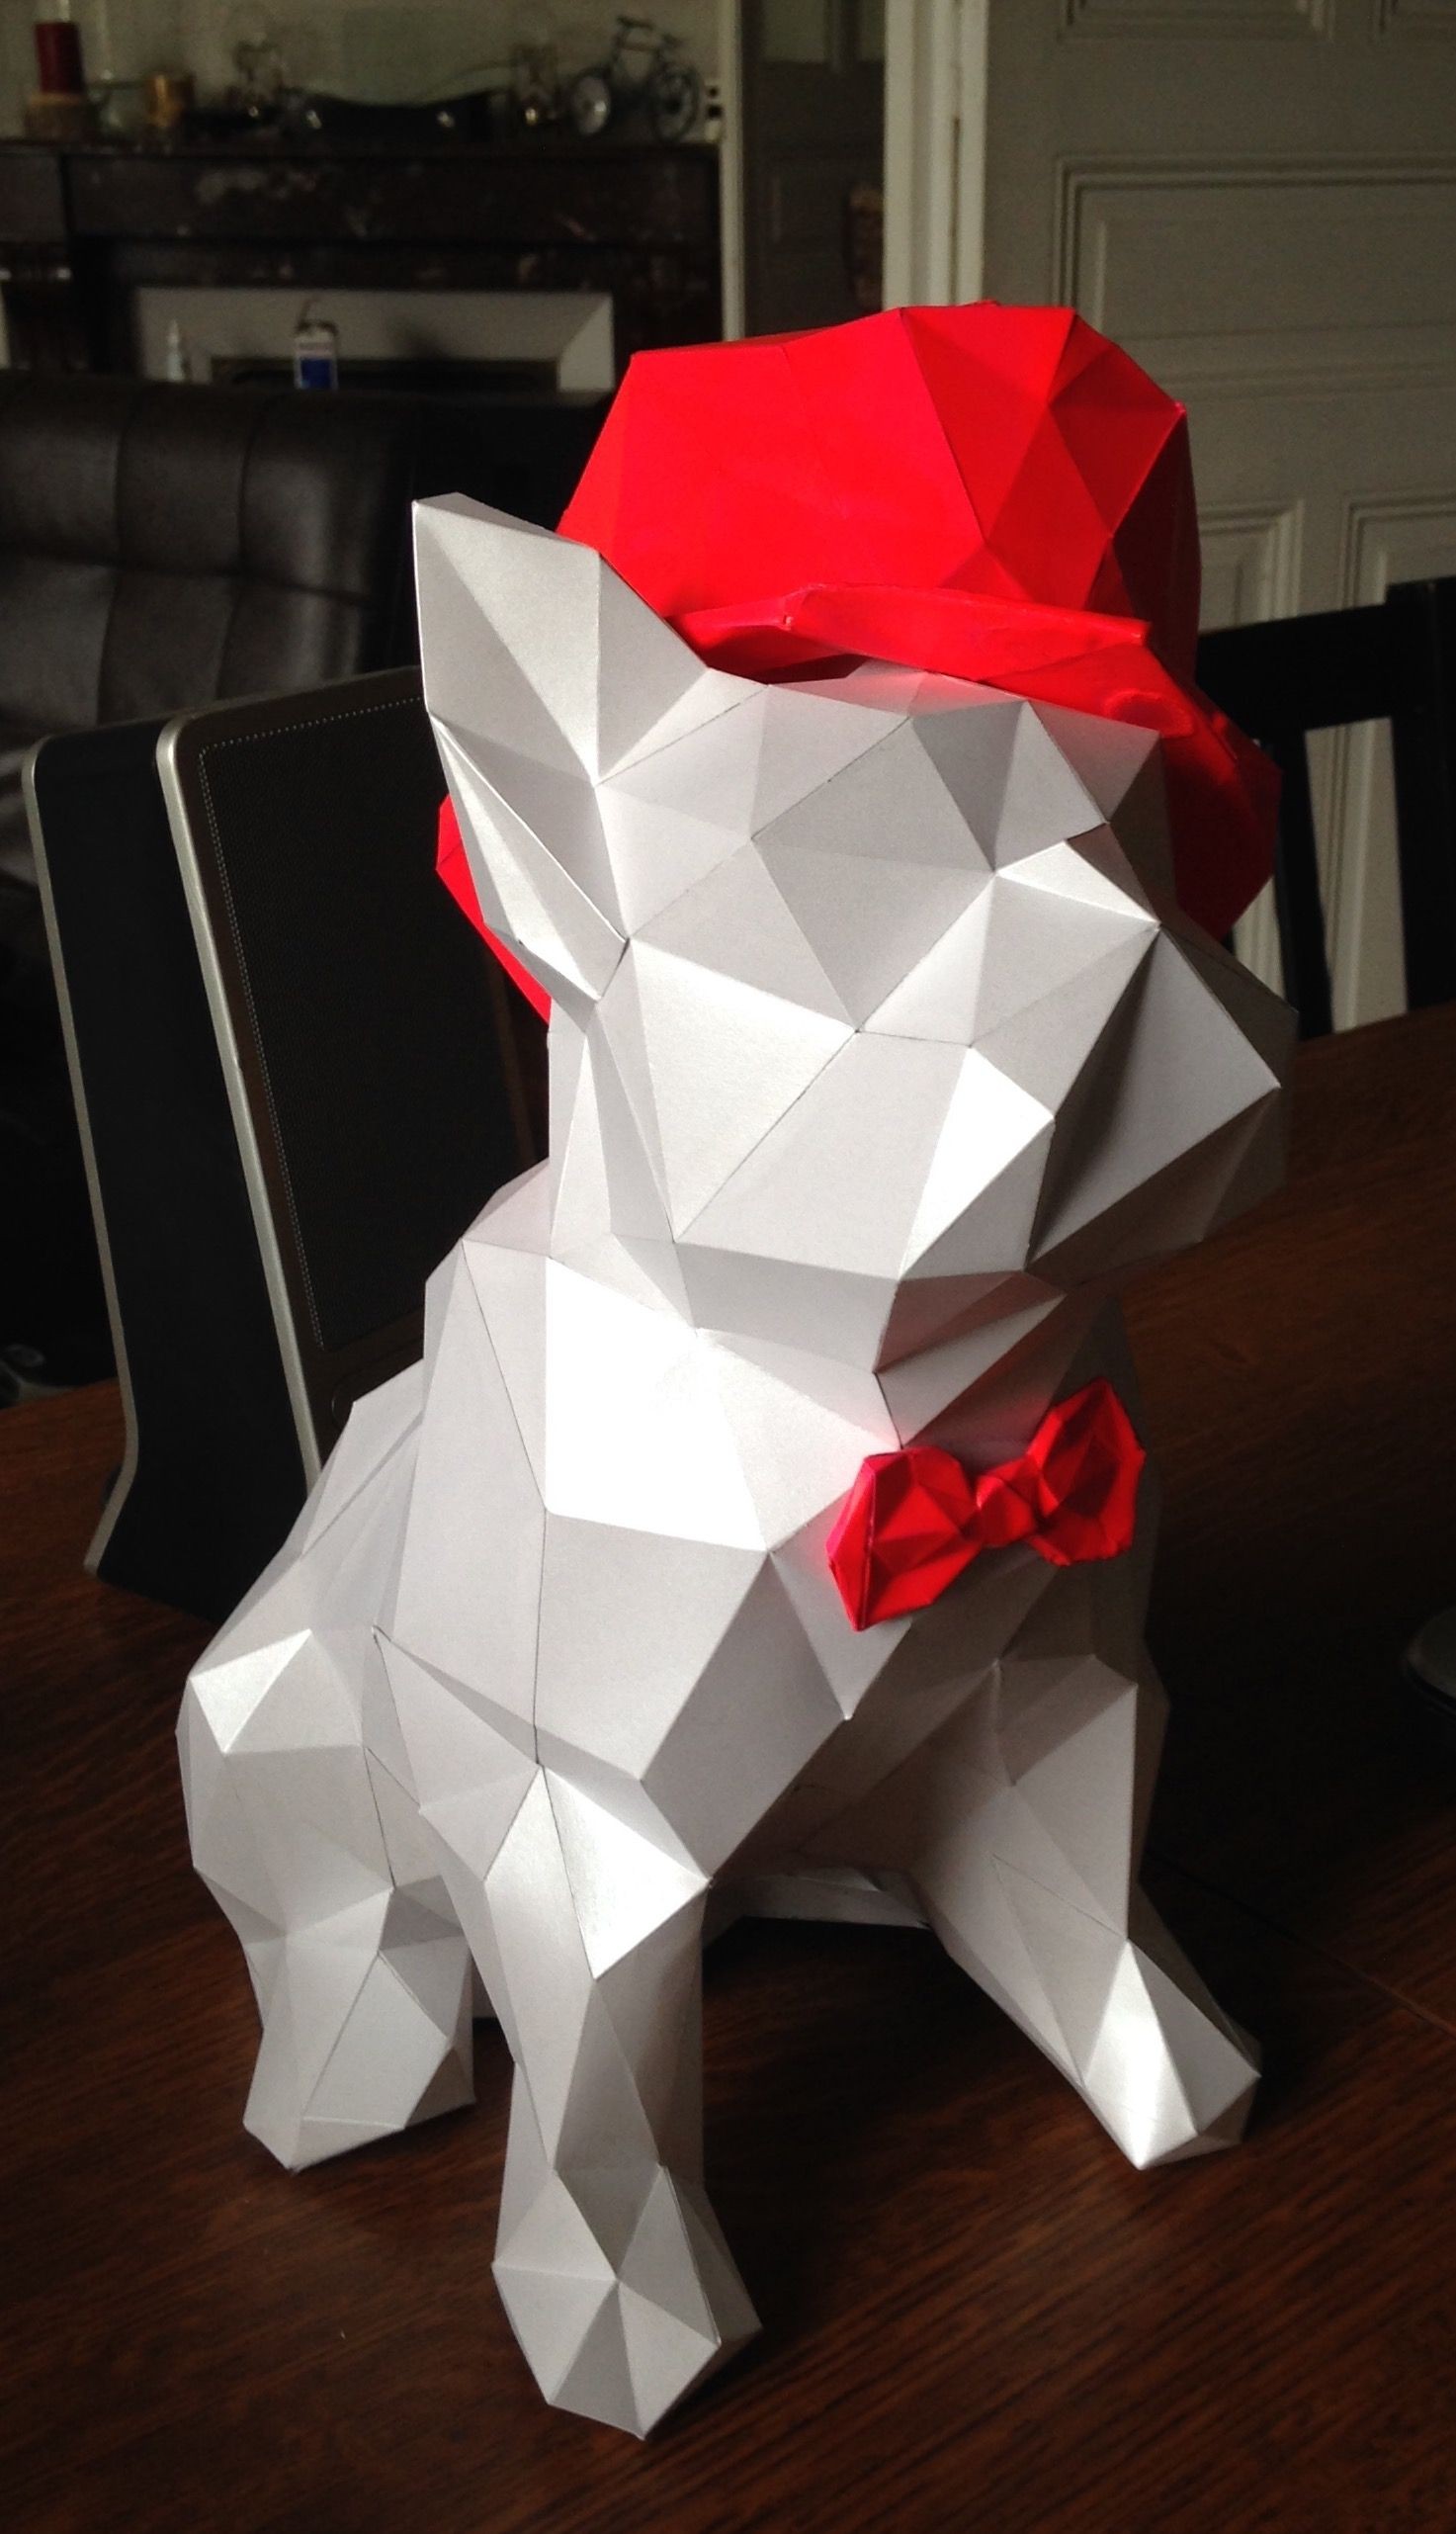 Papercraft Dog Dog Papercraft origami Hat and Bow Tie origami